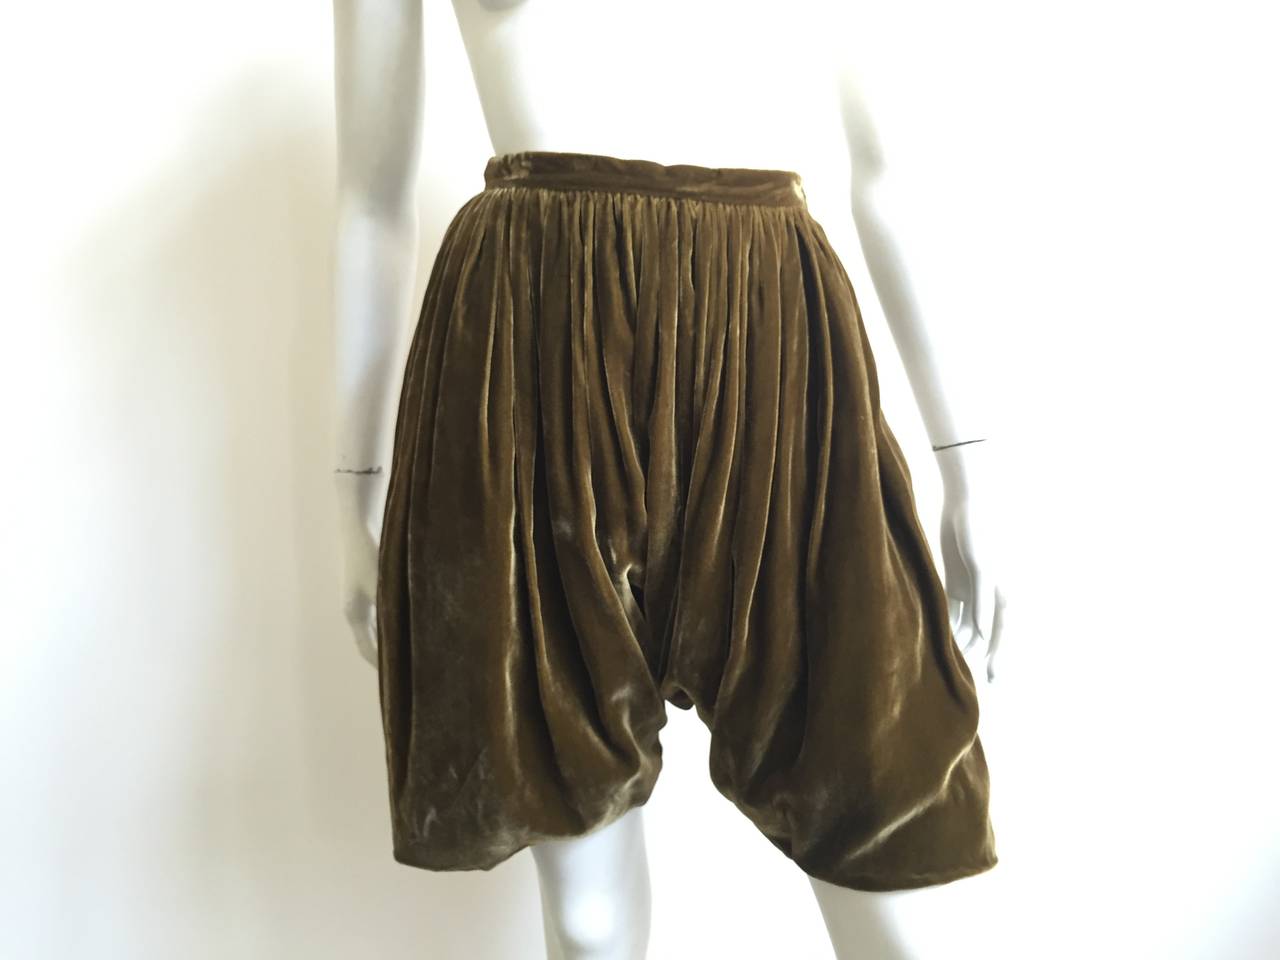 Giorgio Armani new still tags never worn velvet bloomers with pockets size 42 Italian but fits like a USA size 4 ( Please see & use measurements to properly measure your lovely body). These never worn Giorgio Armani velvet bloomers would look